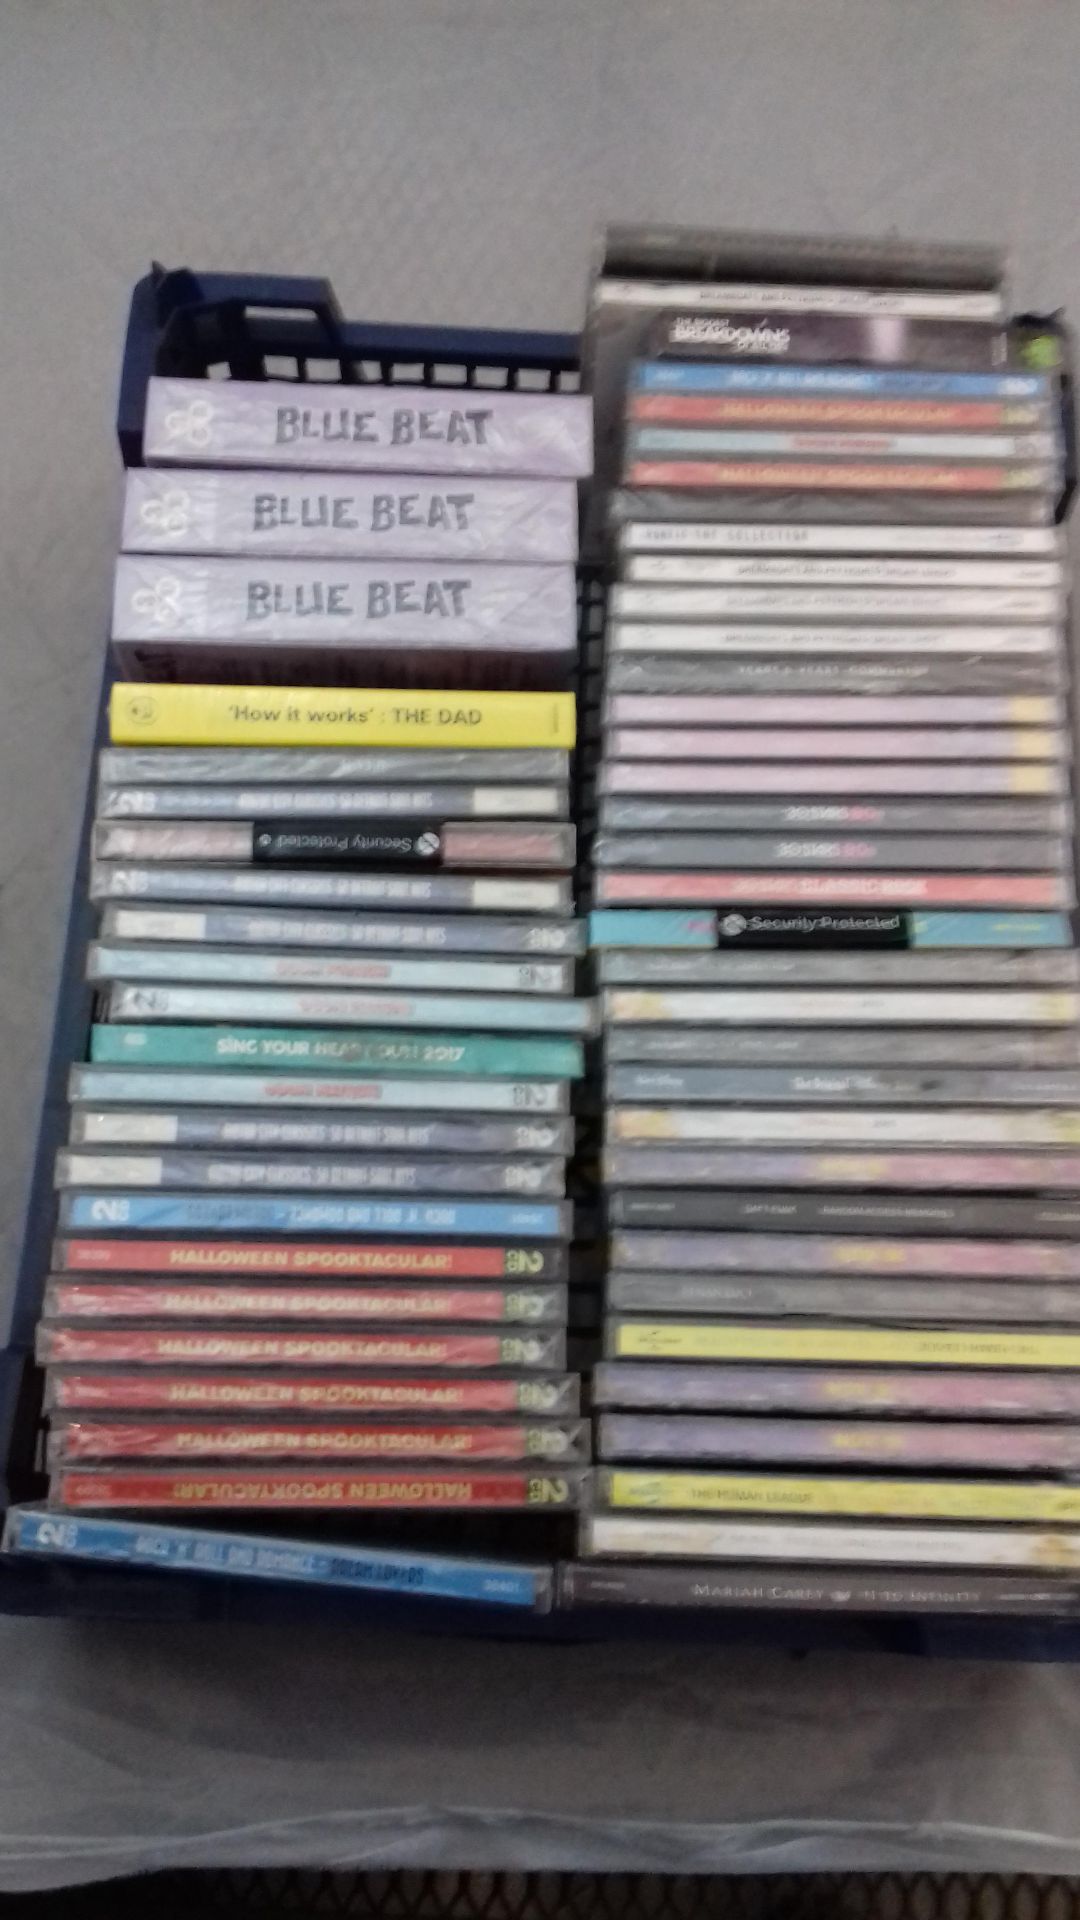 Approx 58 Sealed Cd’s To Include Blue Beat, How It Works: The Dad, Prince.